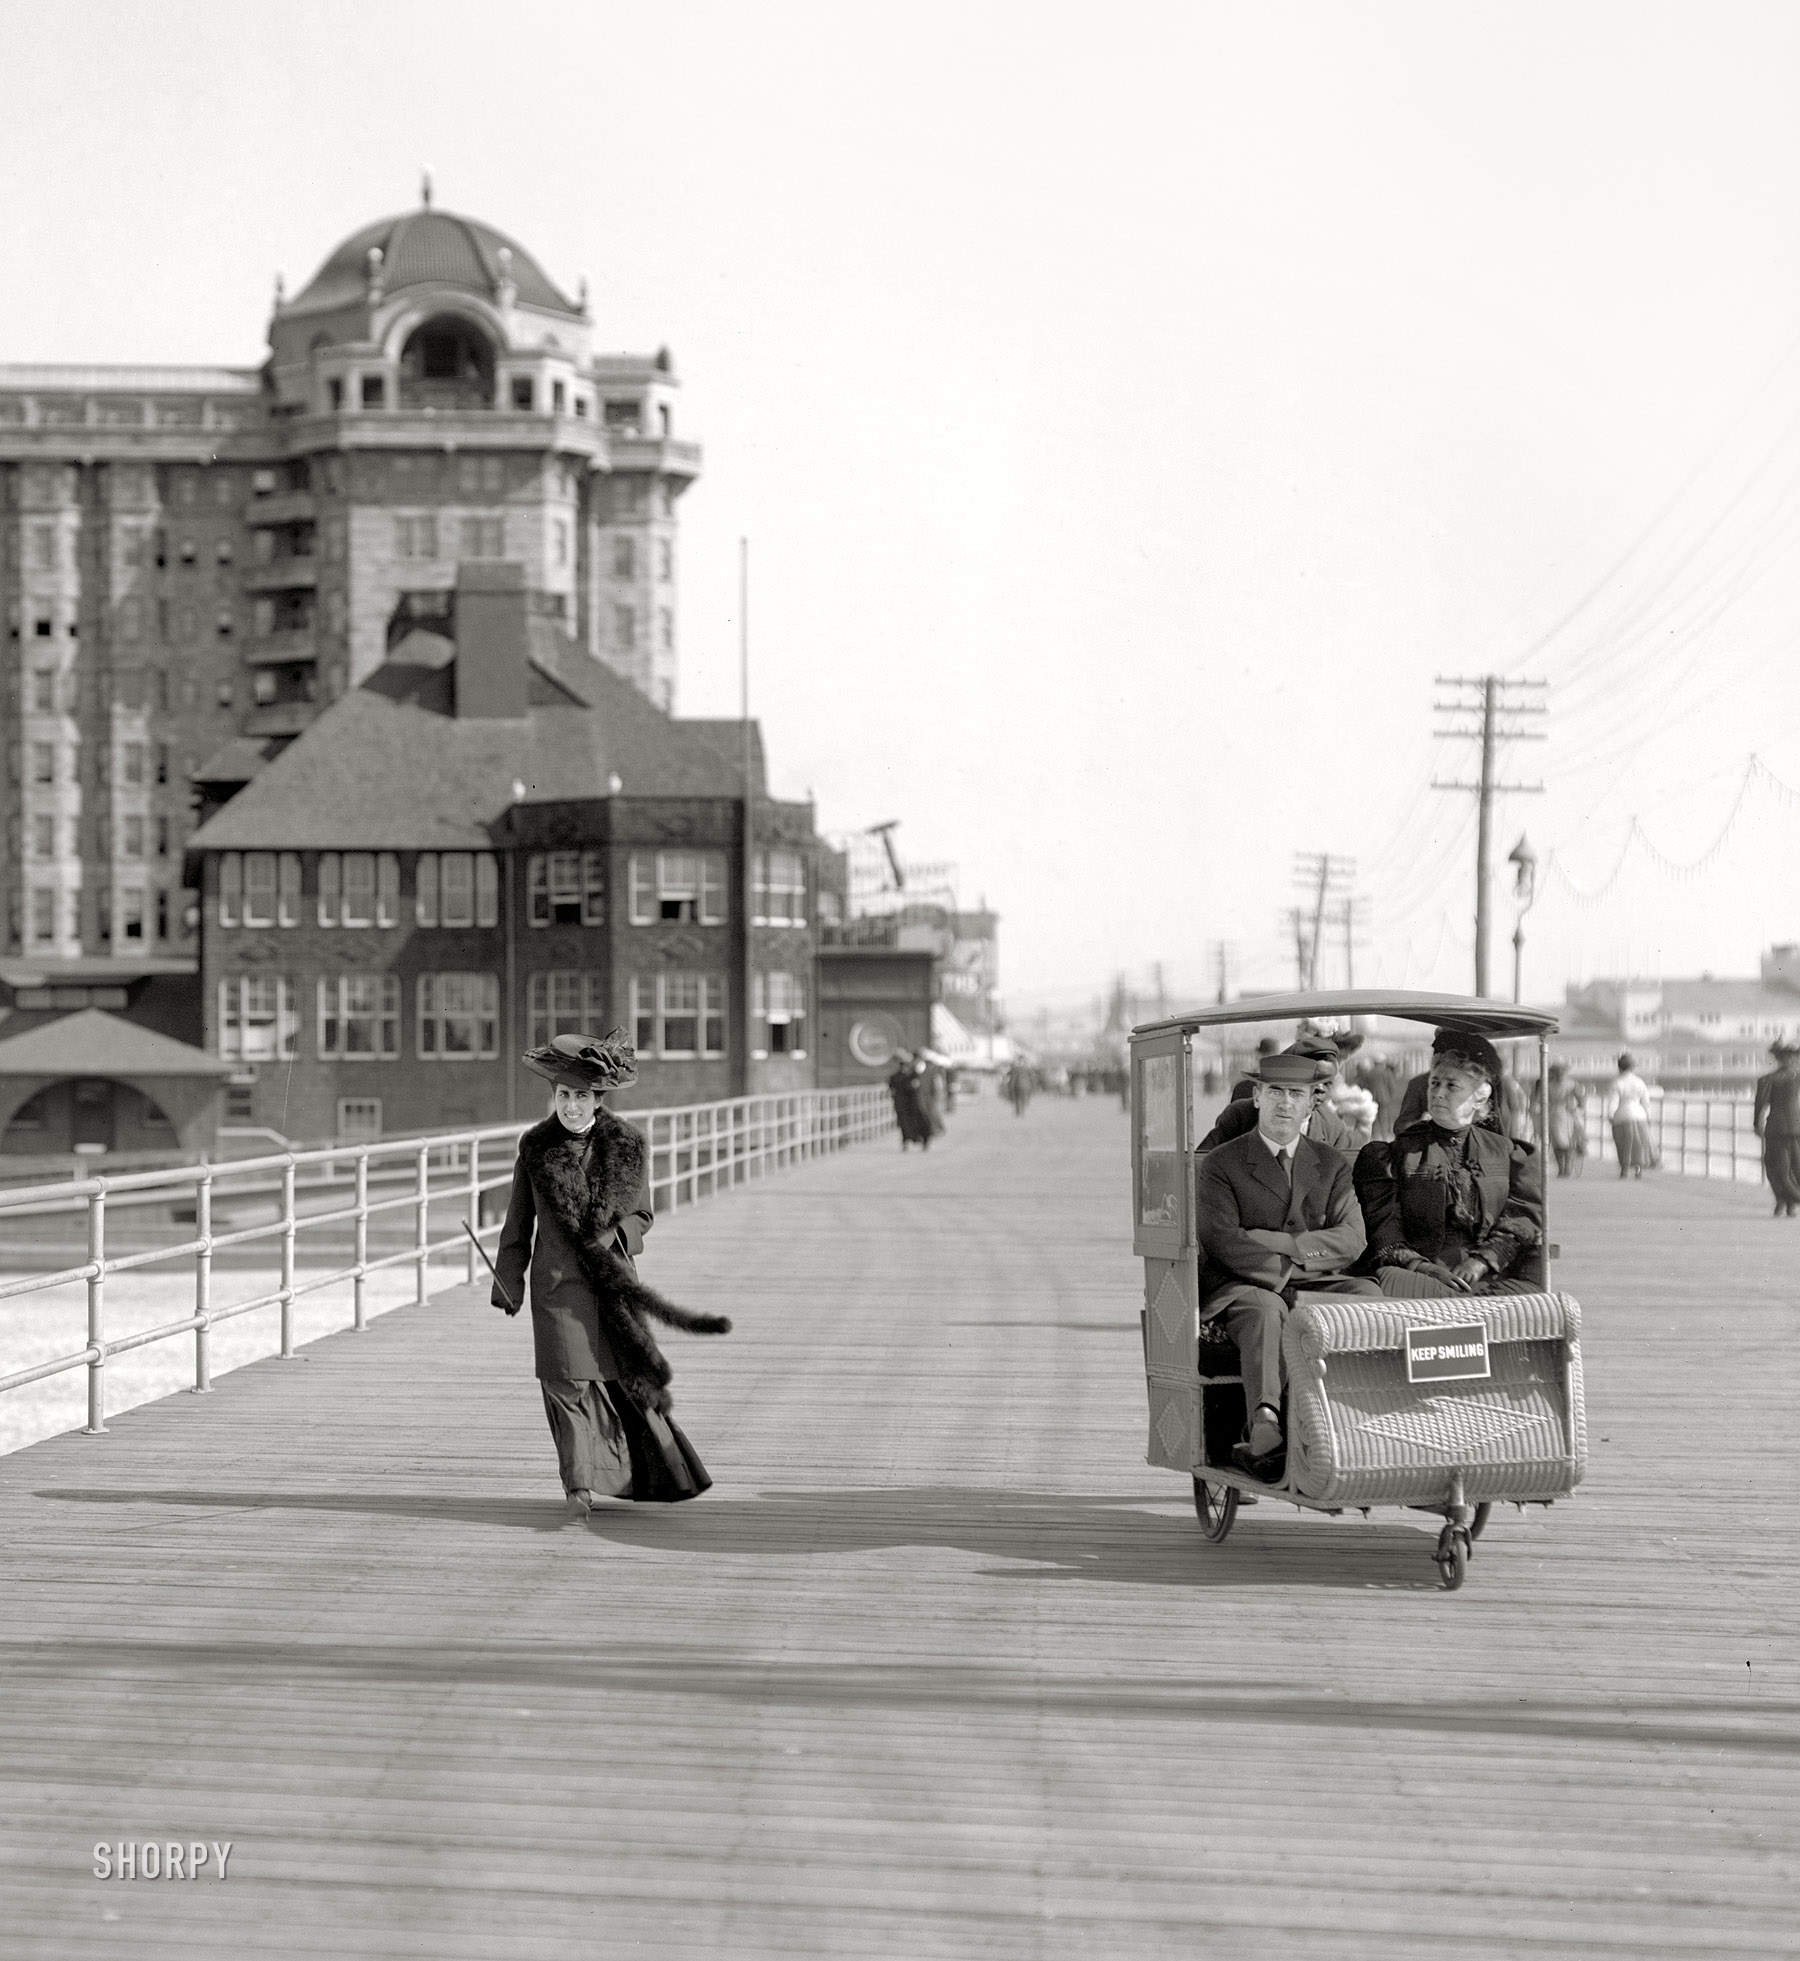 The Jersey shore circa 1906. "Rolling chair on the Boardwalk, Atlantic City." In the distance, the giant safety razor seen on the Gillette sign in the previous post. 8x10 inch dry plate glass negative, Detroit Publishing Company. View full size.